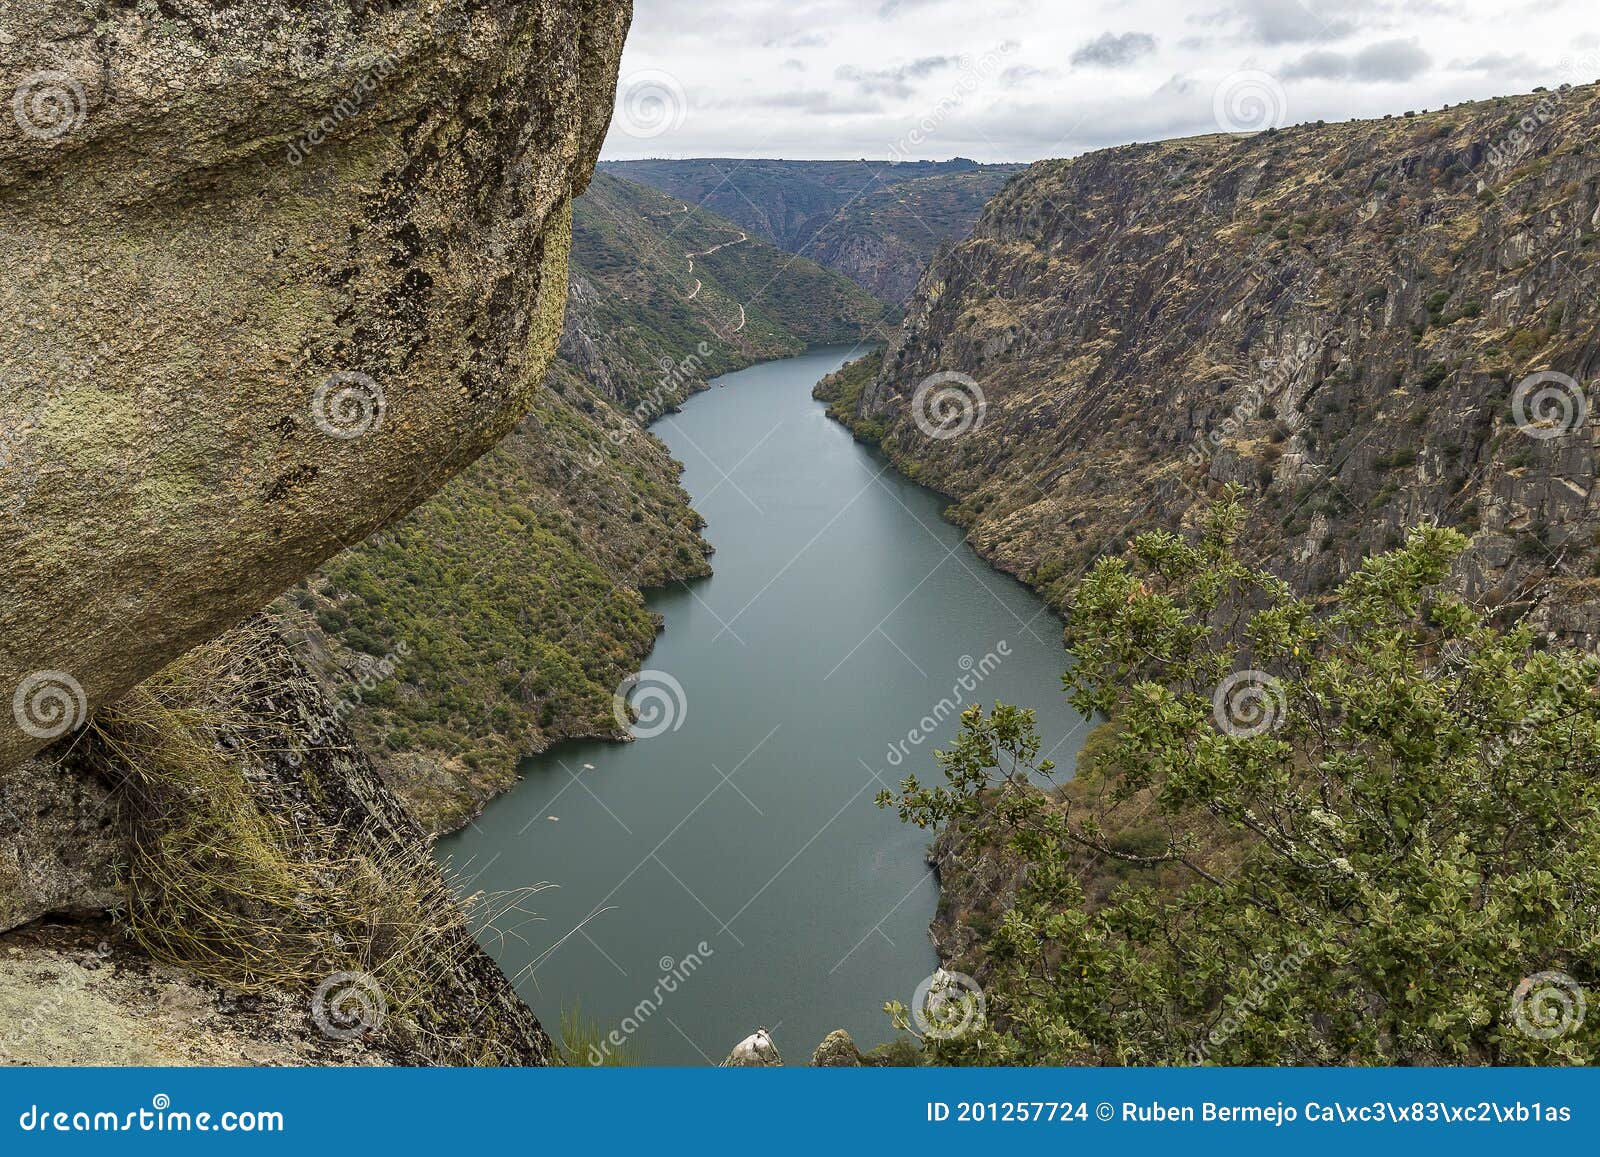 spectacular view of the arribes del duero canyon from the picon de felipe viewpoint